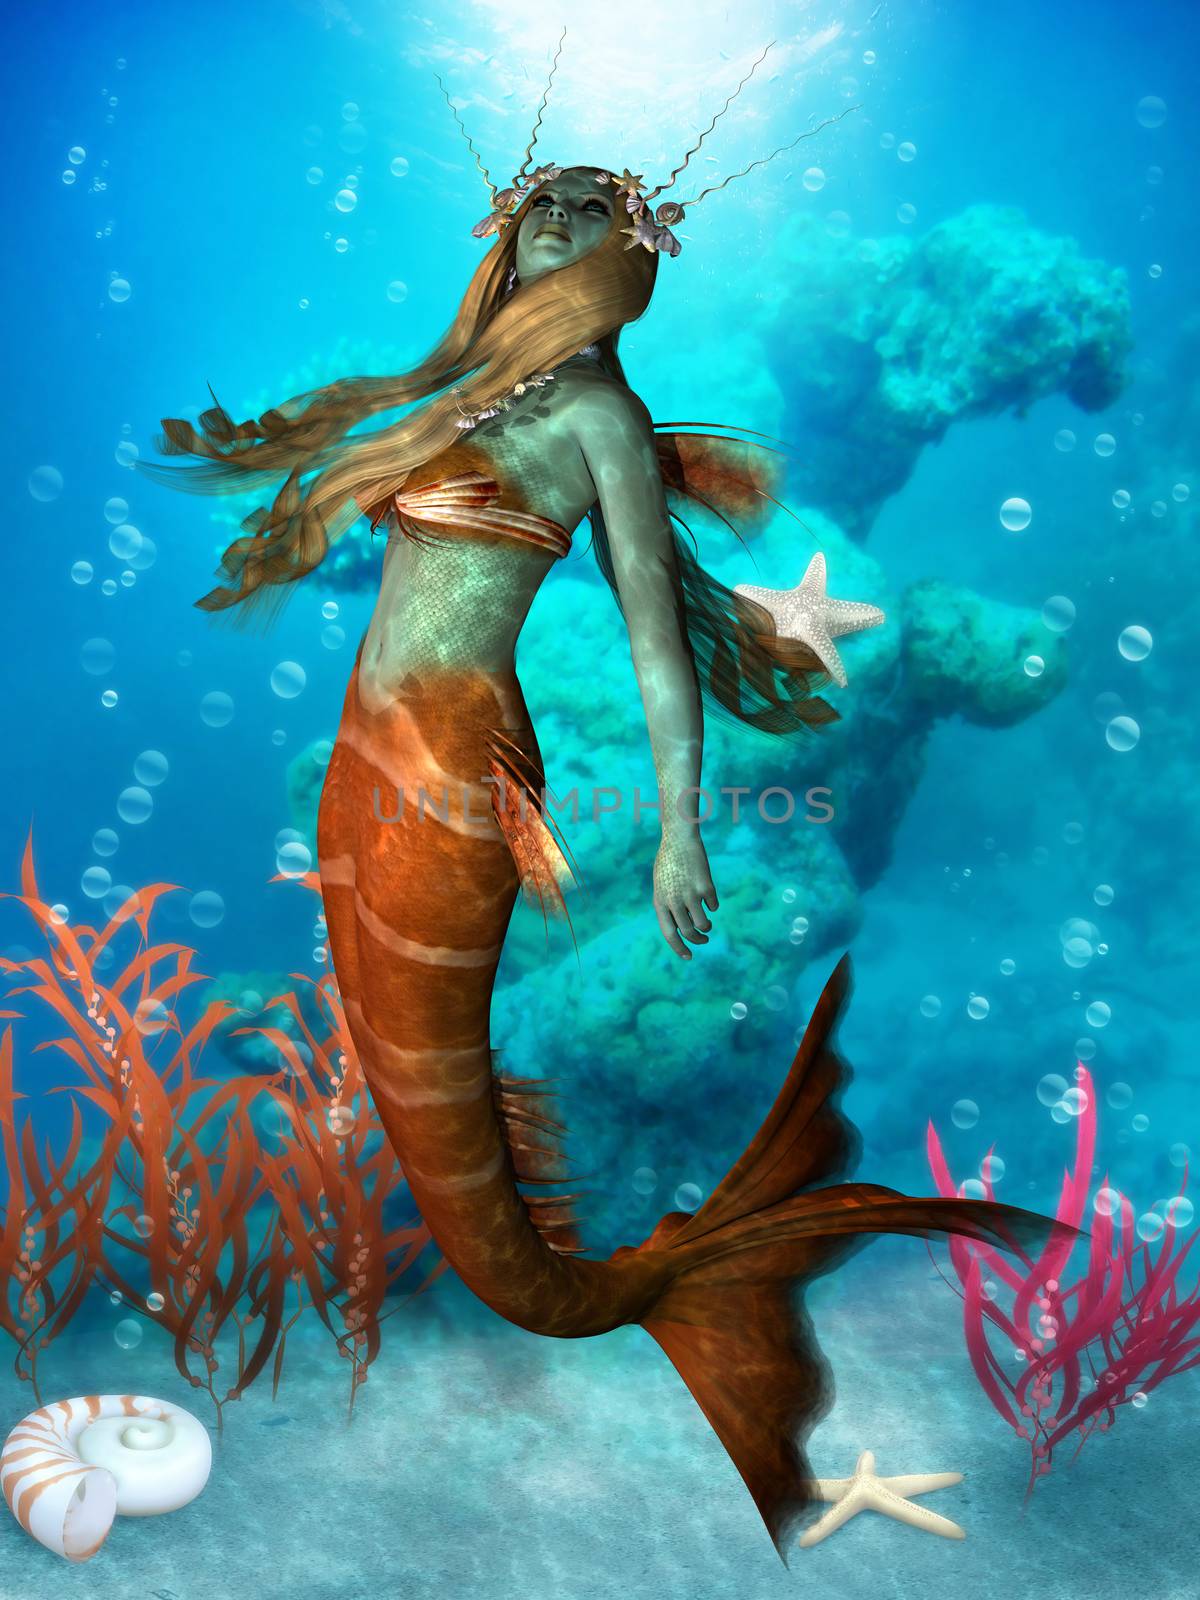 The Mermaid is a legendary aquatic creature with the upper body of a woman and the tail of a fish.